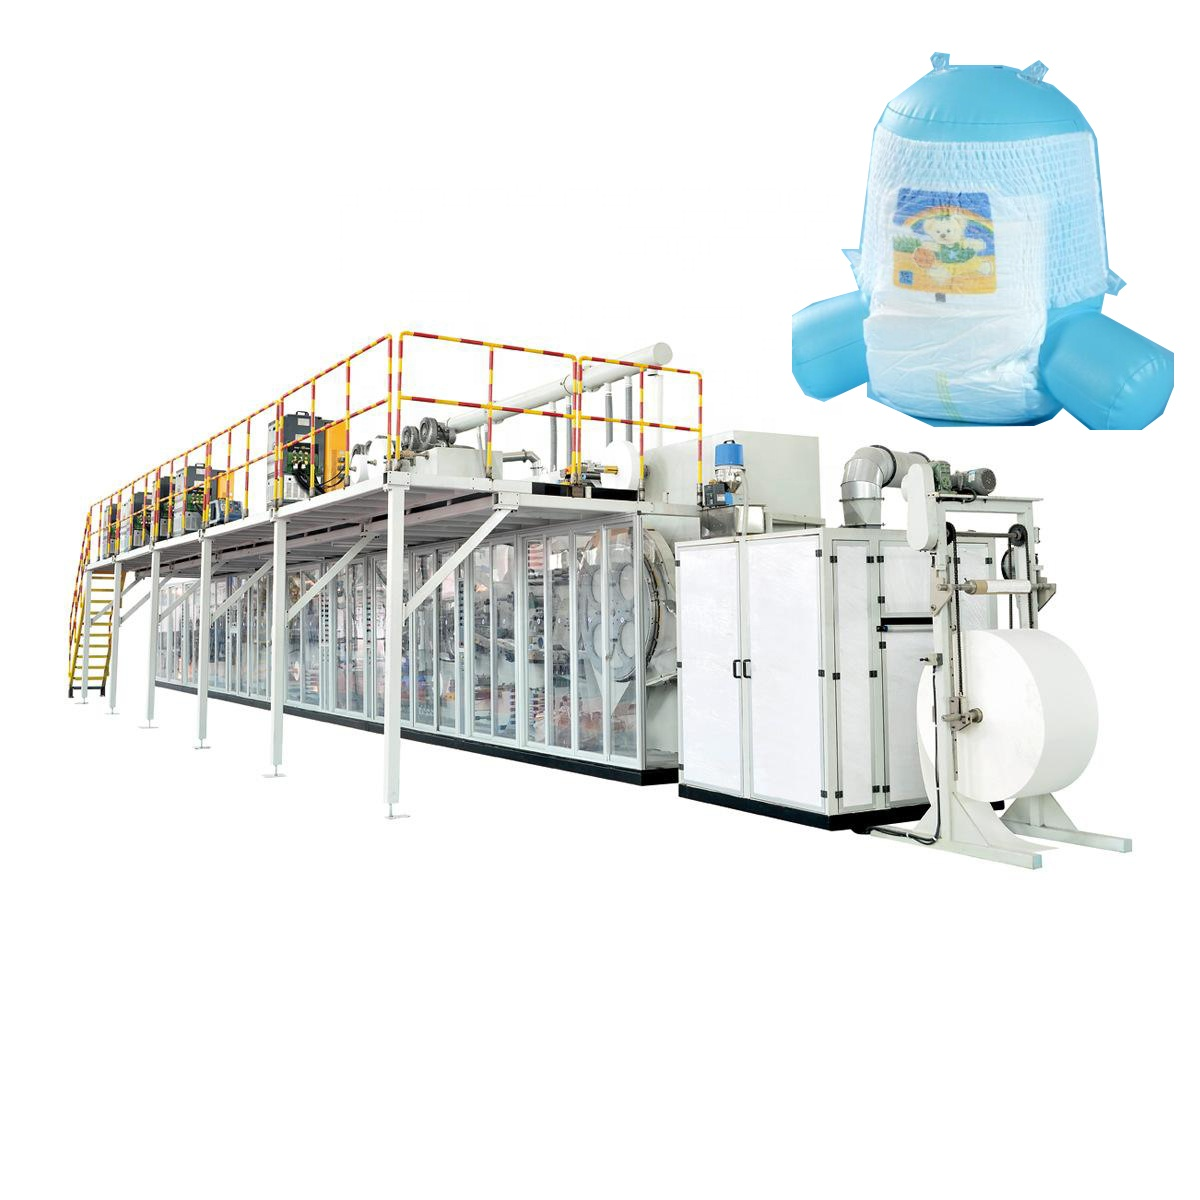 Hot Selling Professional baby diapers machine making machine for making disposable diapers 